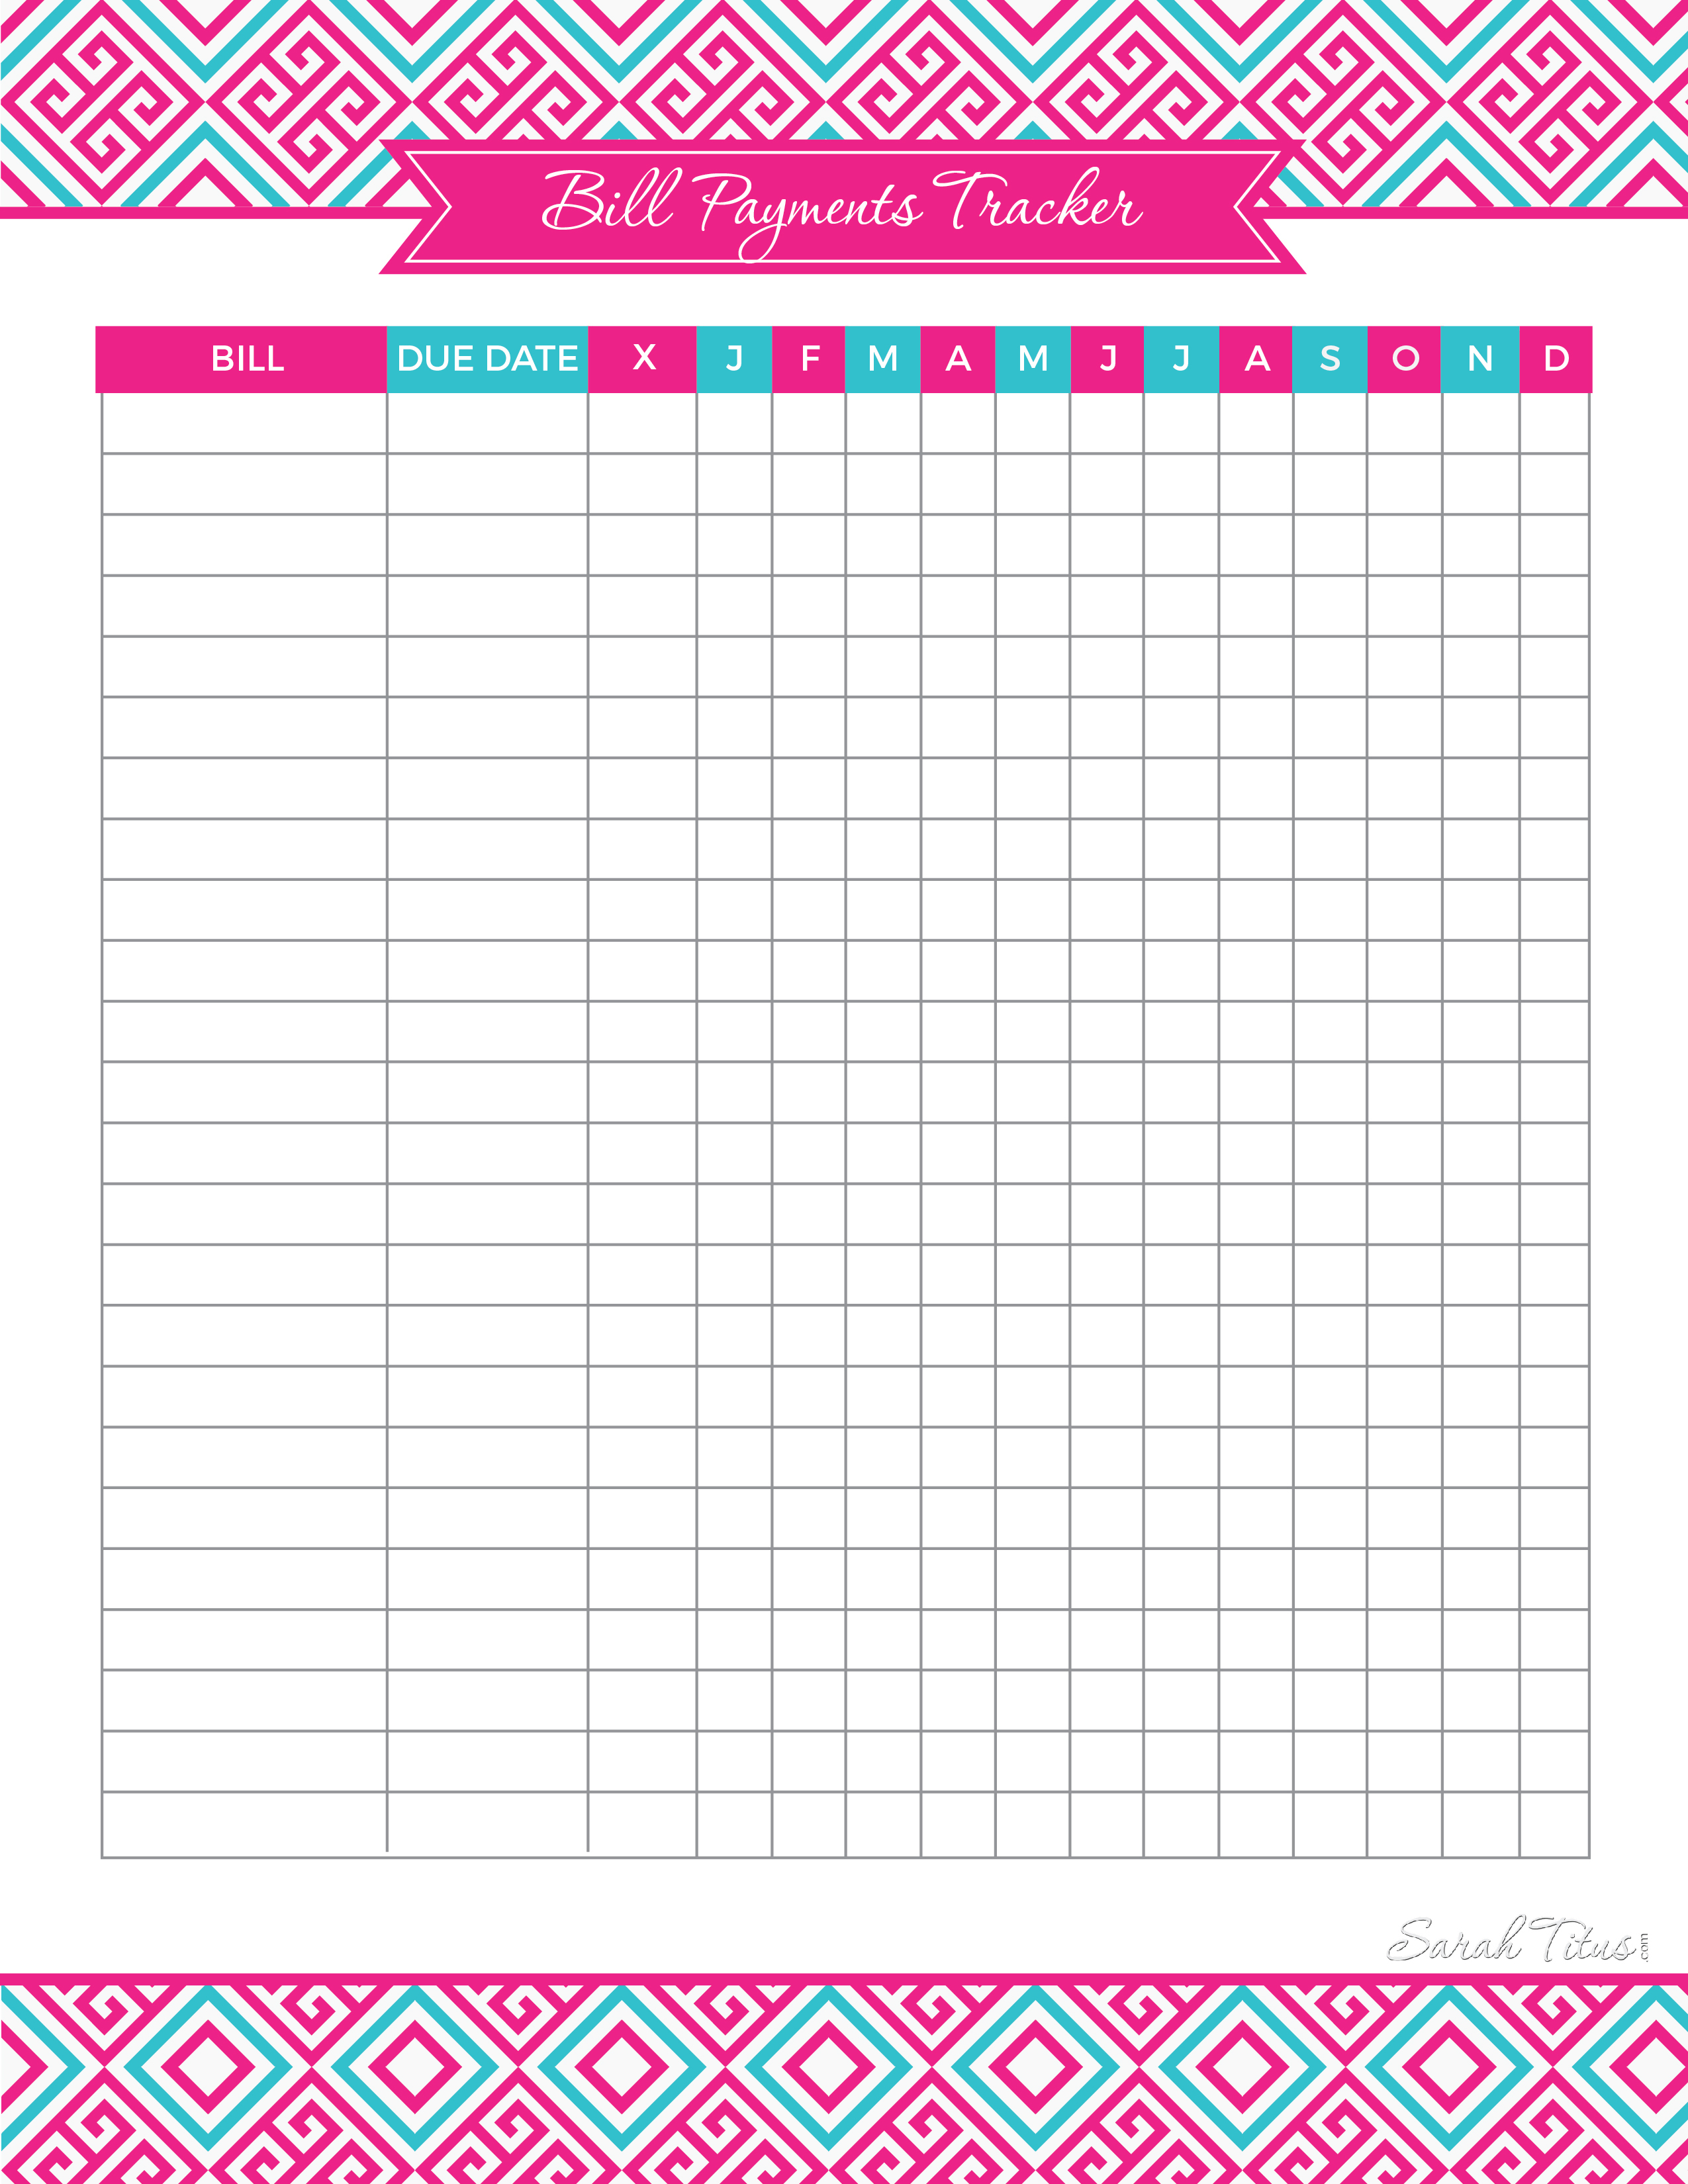 Free Printables Archives - Page 42 Of 47 - Sarah Titus - Free Printable Bill Tracker